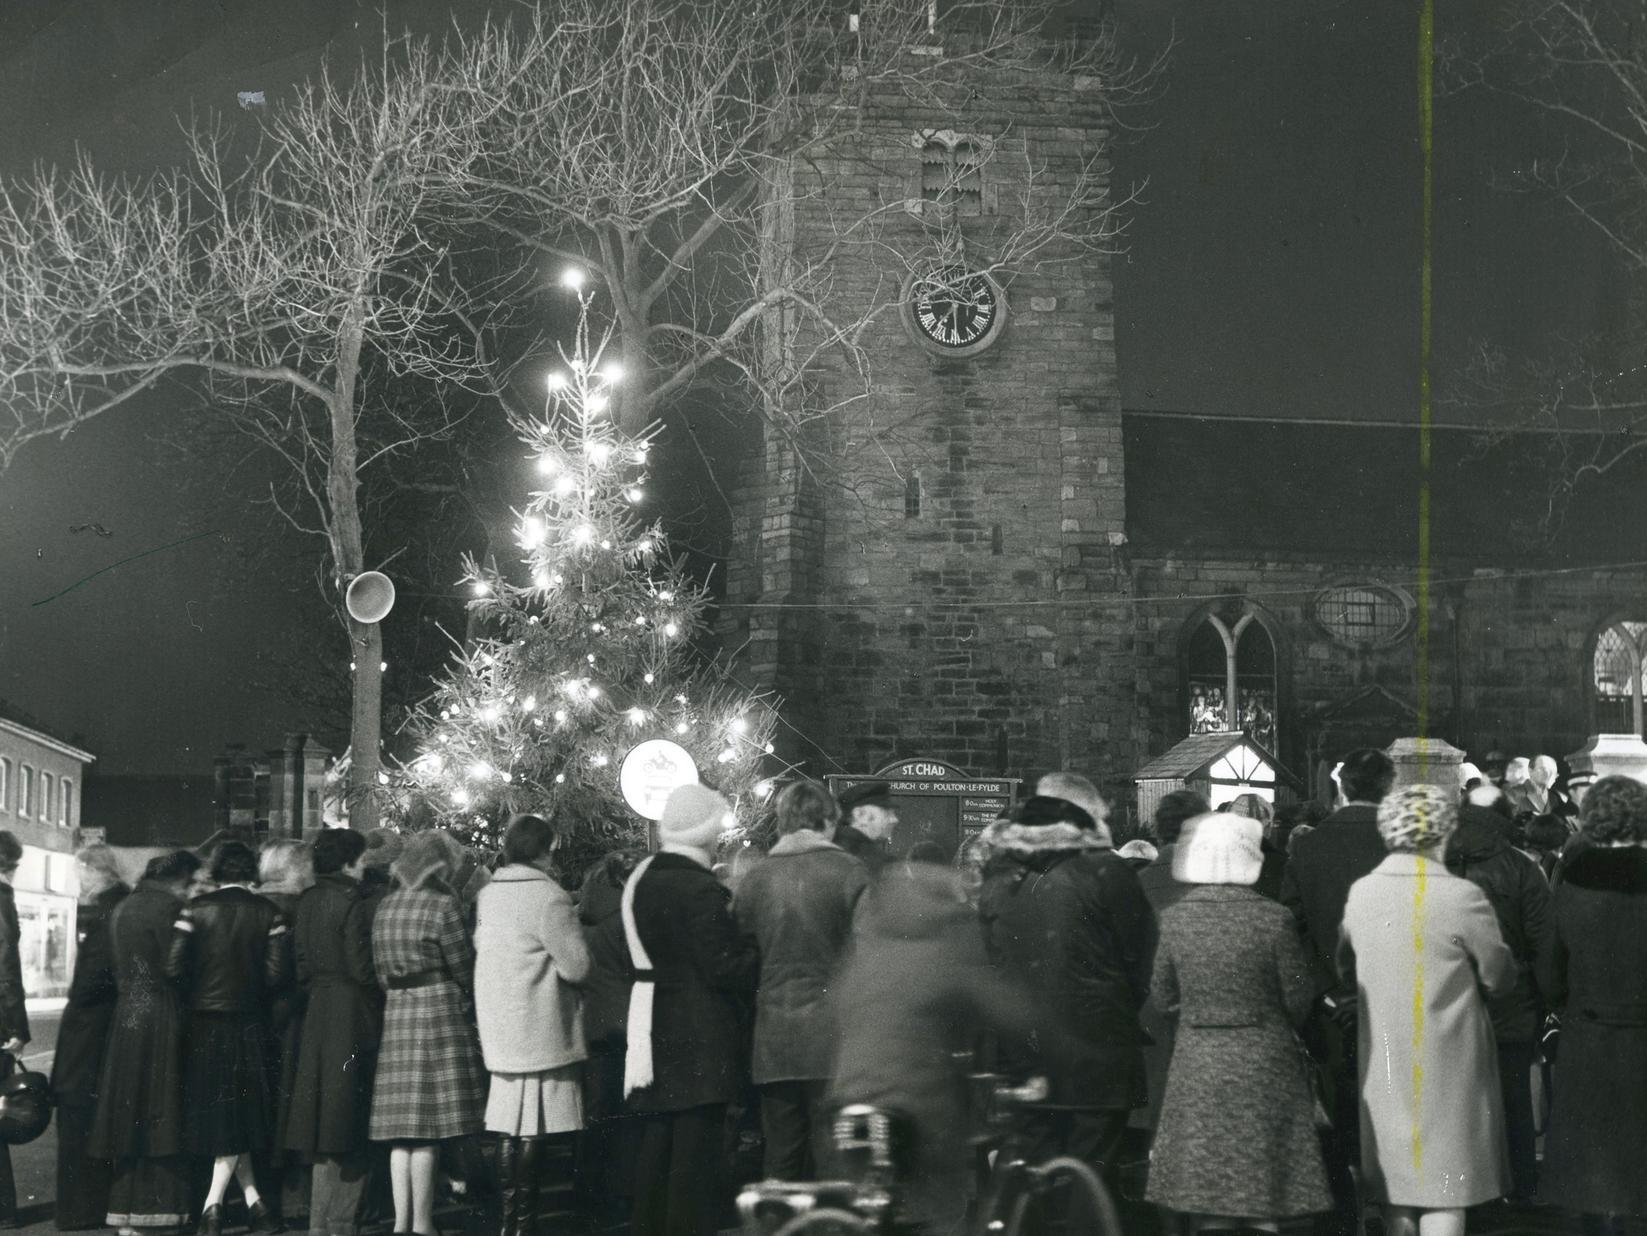 Carollers round the Christmas tree outside St Chads Church in Poulton, 1976